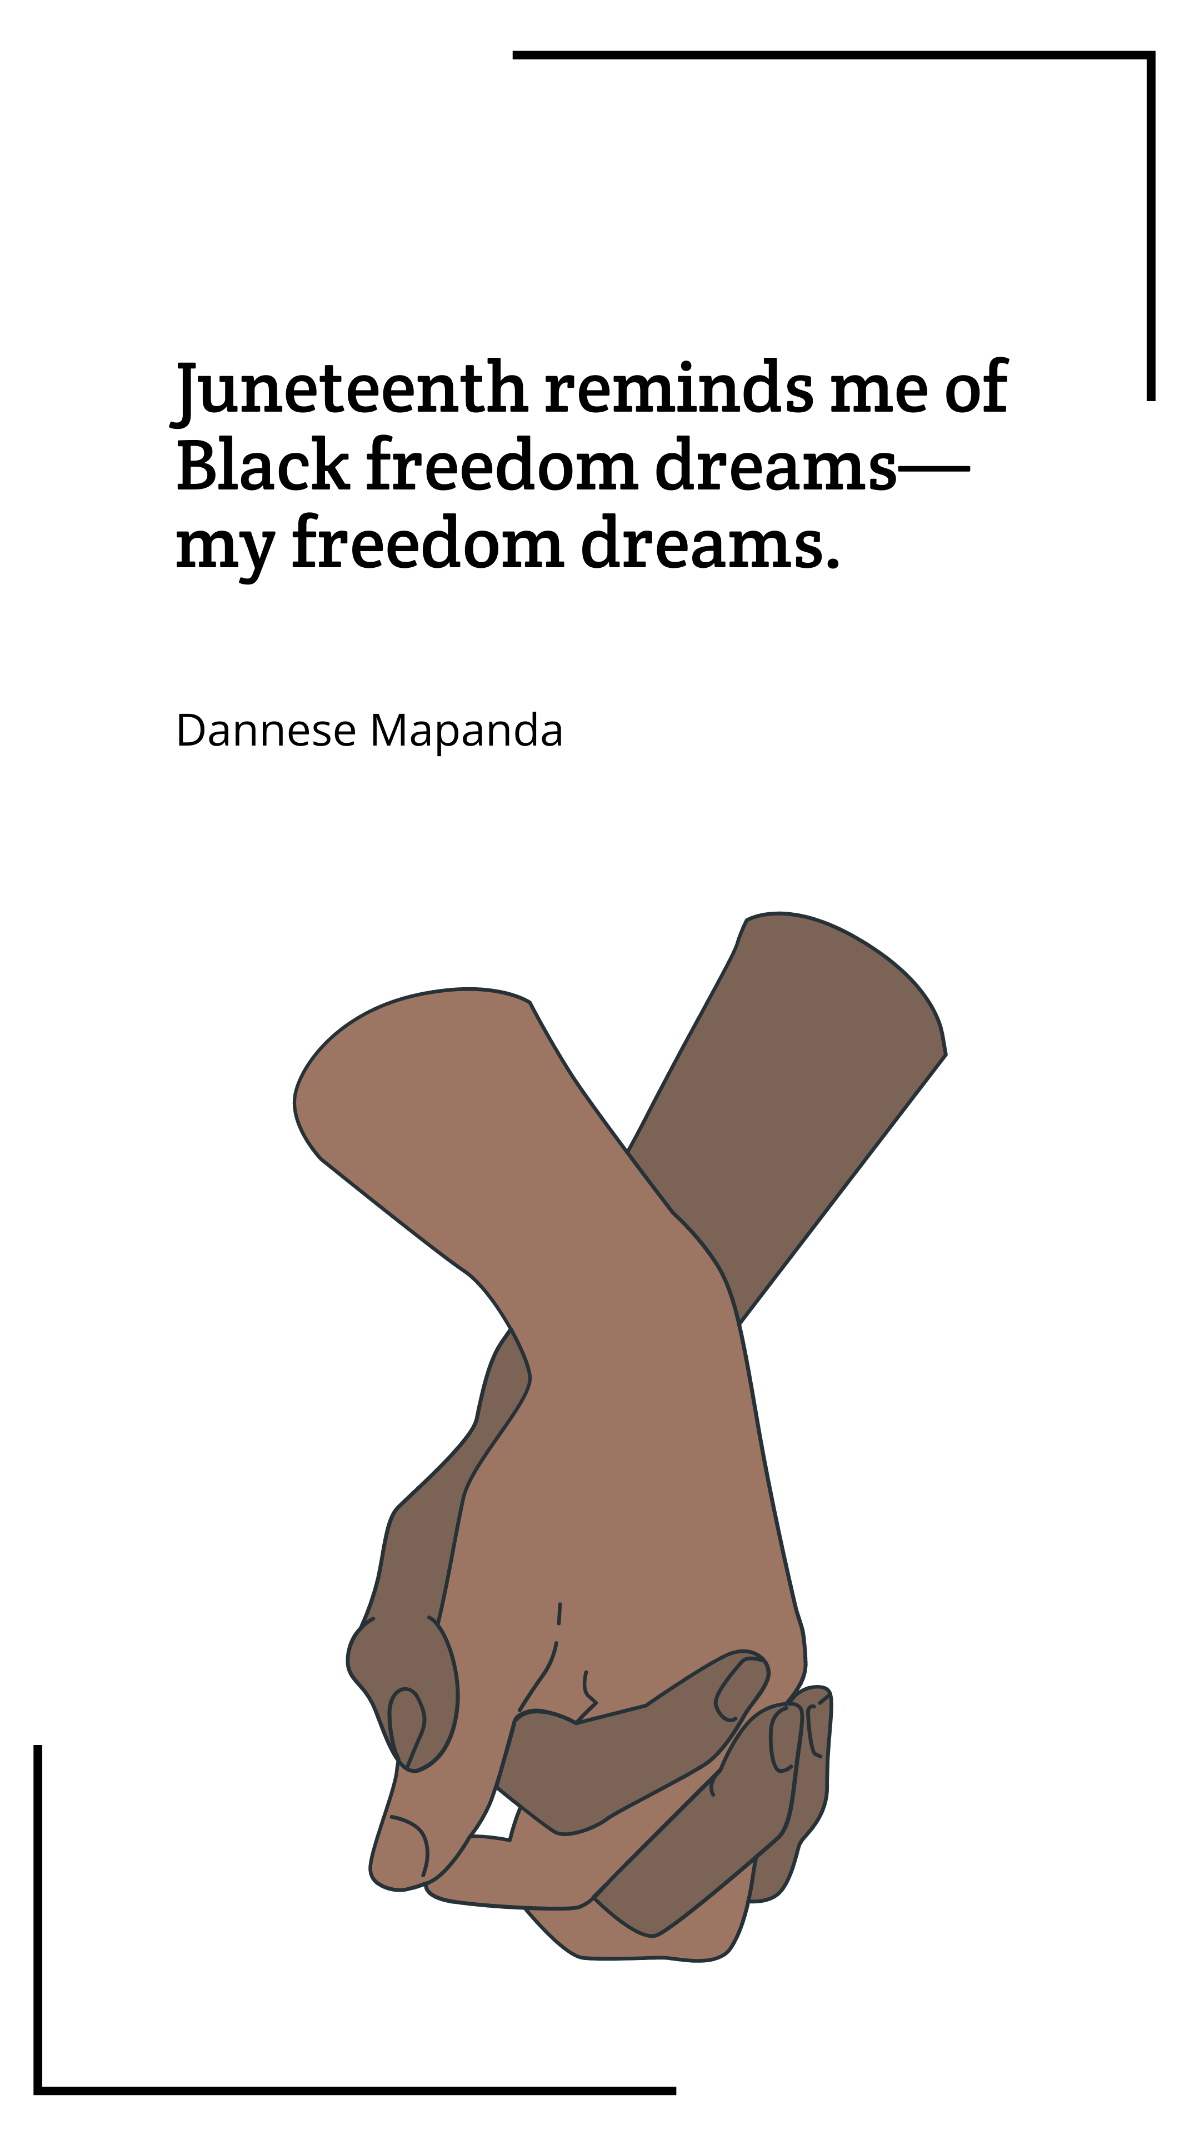 Dannese Mapanda - Juneteenth reminds me of Black freedom dreams—my freedom dreams. Template